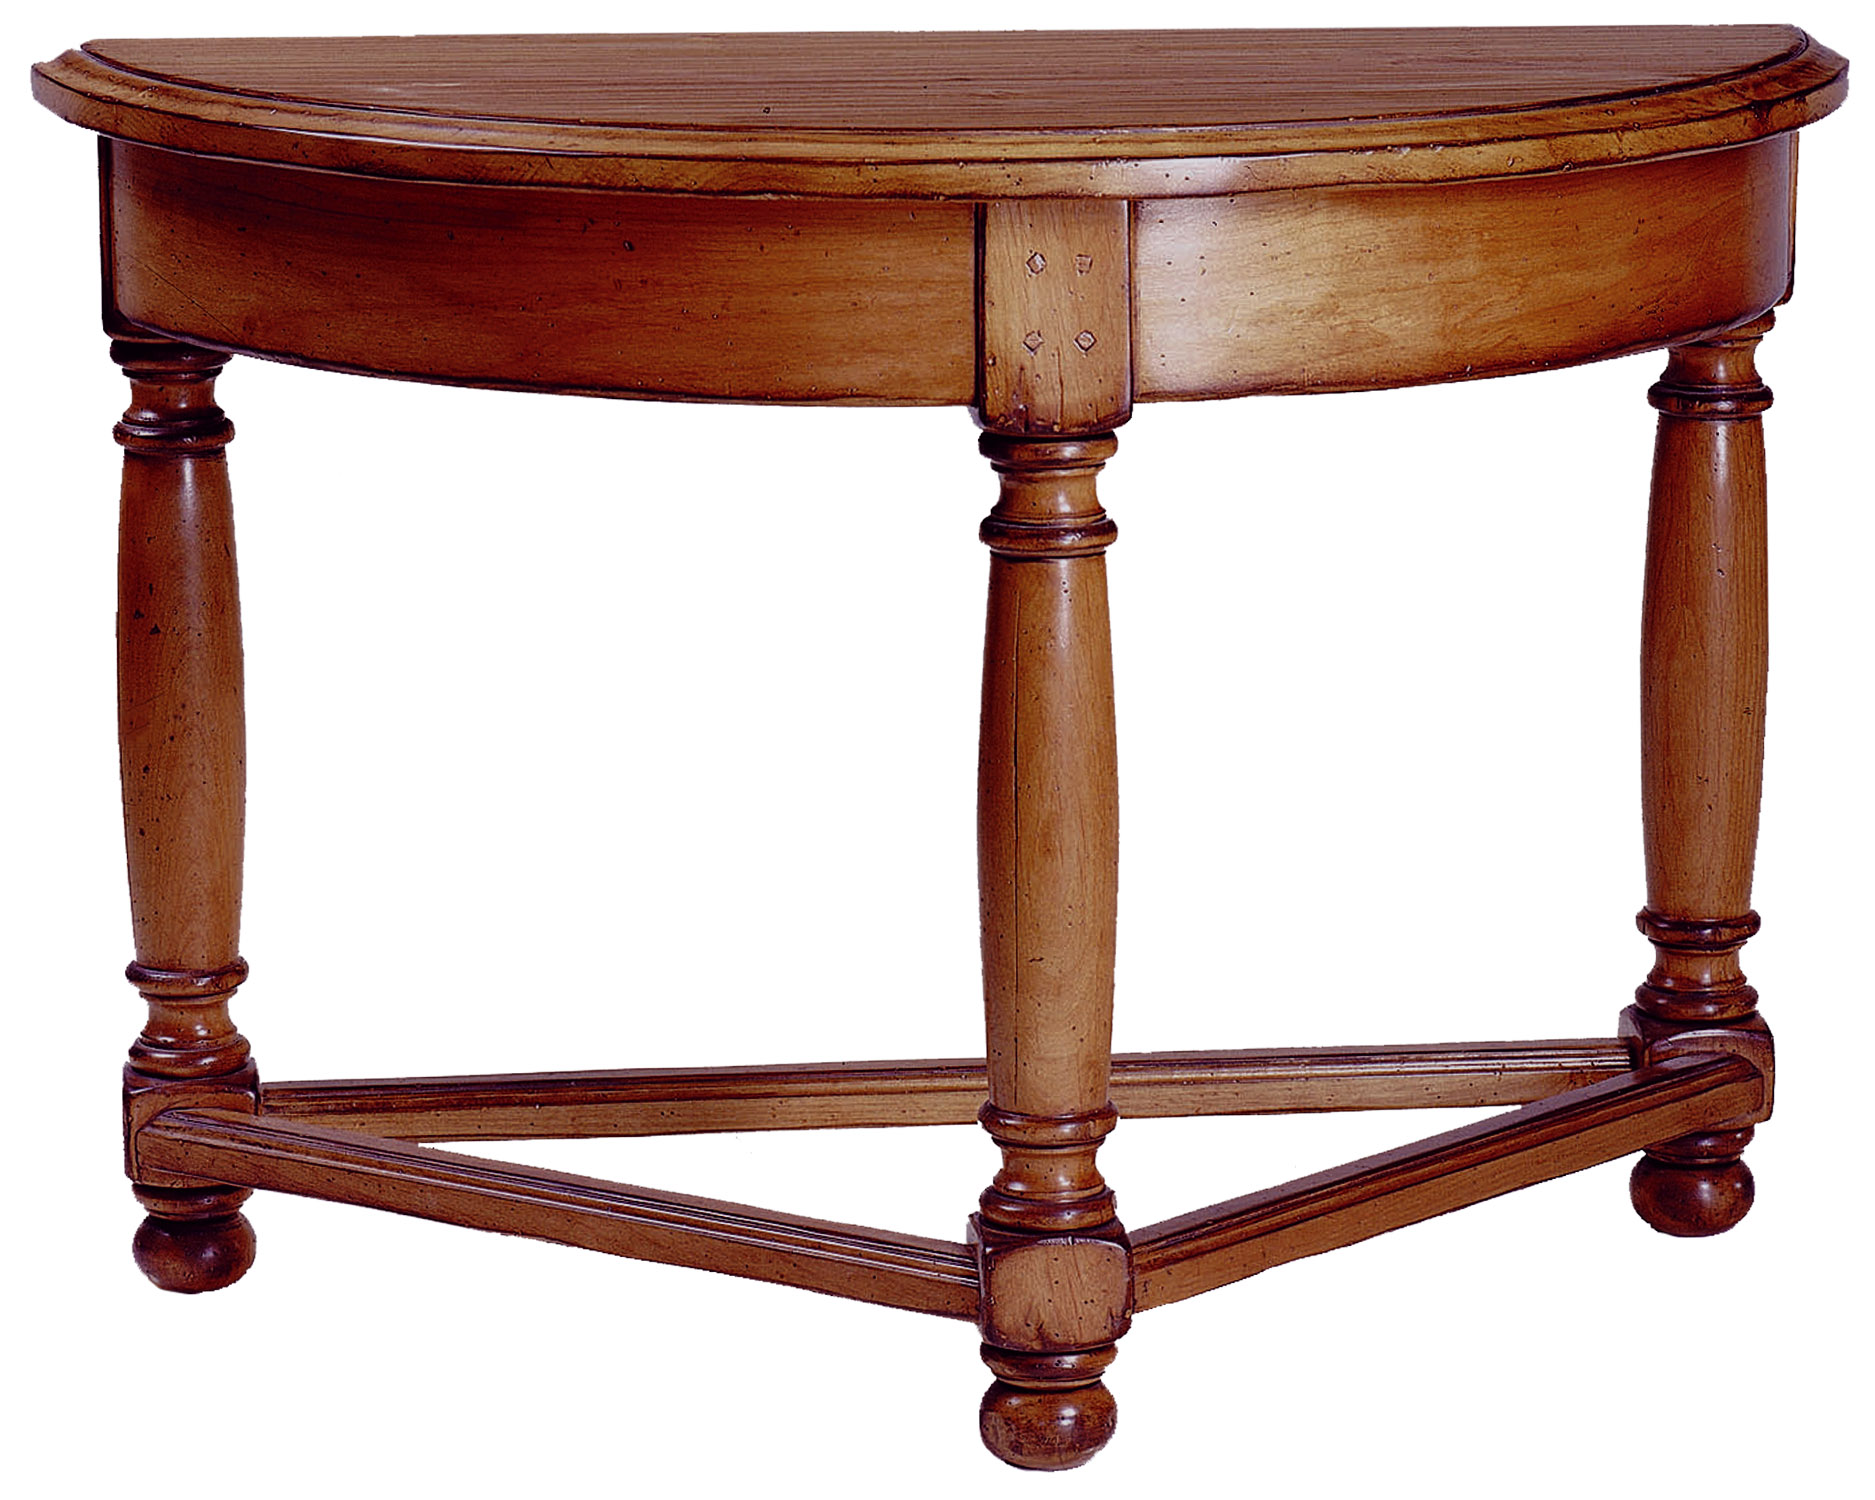 Cassia traditional demilune side table end table by Woodland furniture in Idaho Falls